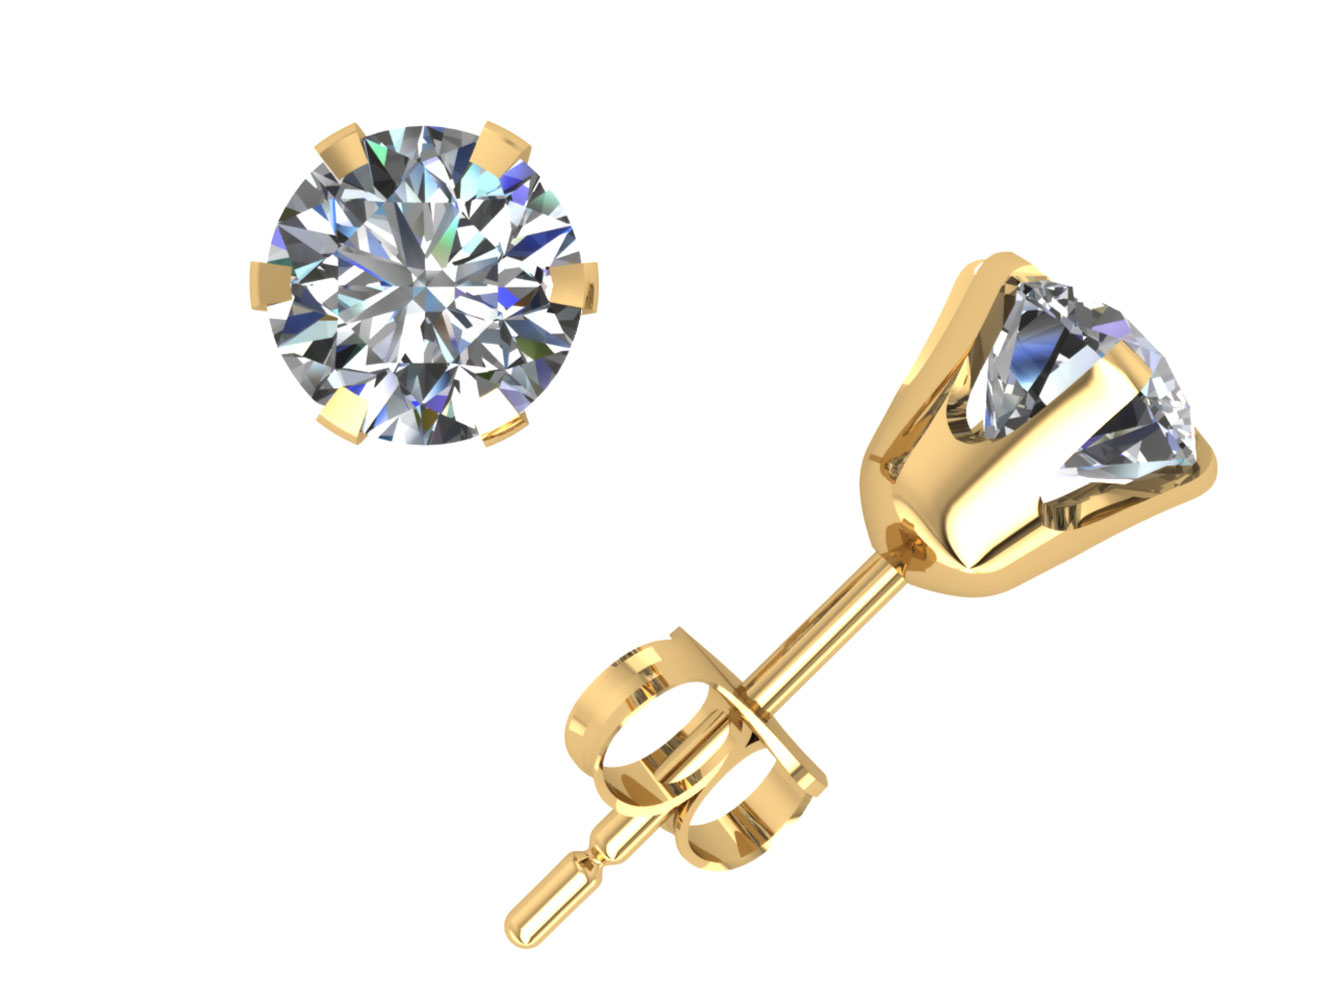 Jewel We Sell Genuine 1.00Ct Round Diamond Stud Earrings 18k White or Yellow Gold Prong Push Back F VS2